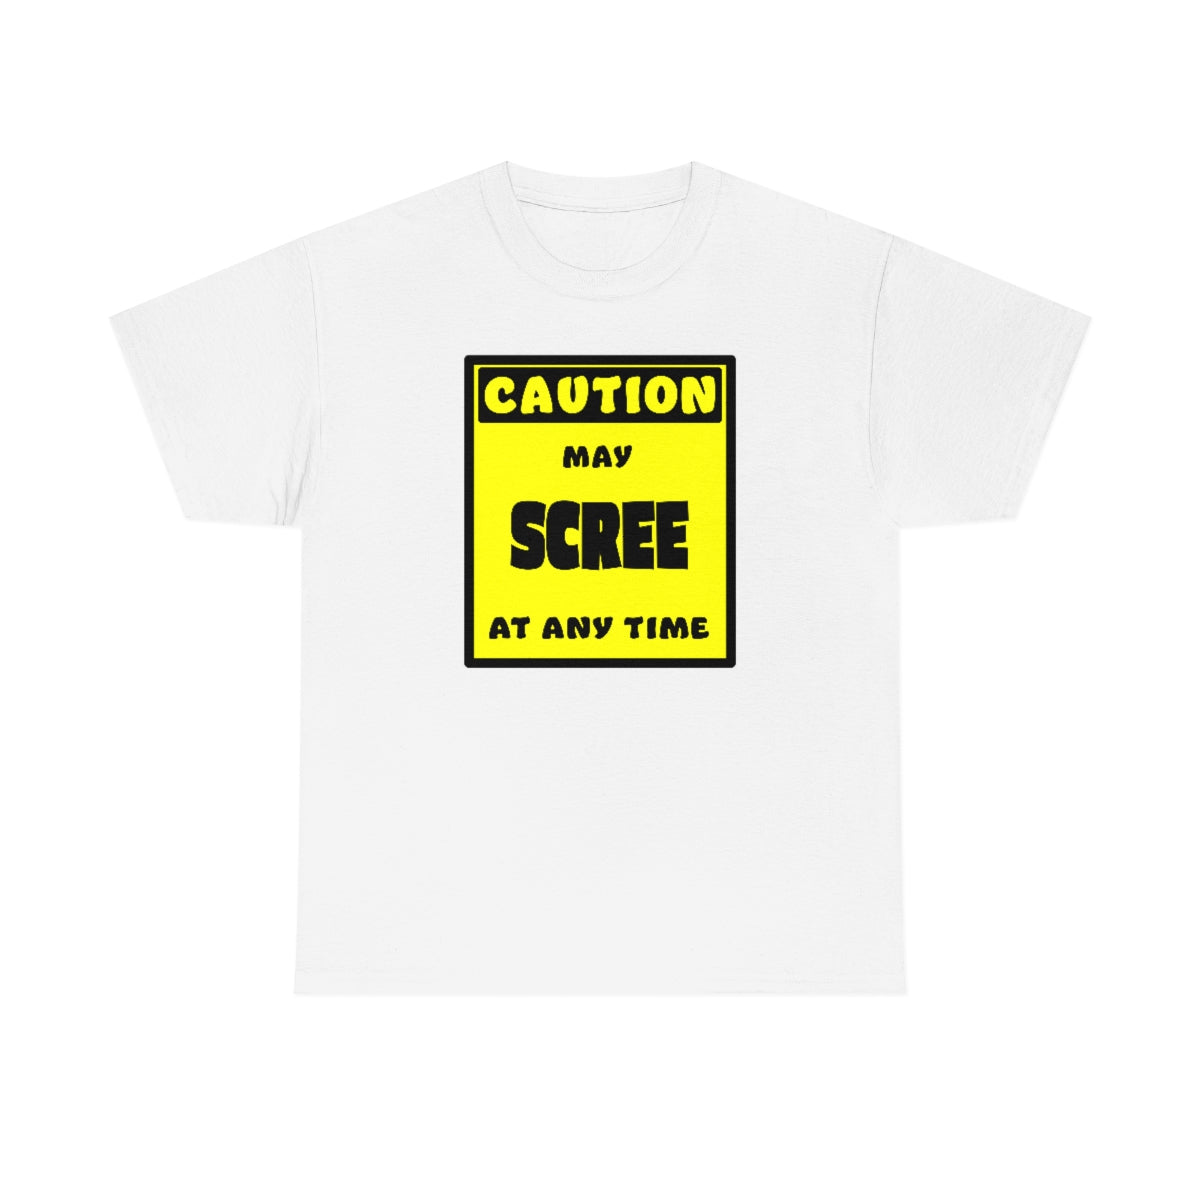 CAUTION! May SCREE at any time! - T-Shirt T-Shirt AFLT-Whootorca White S 